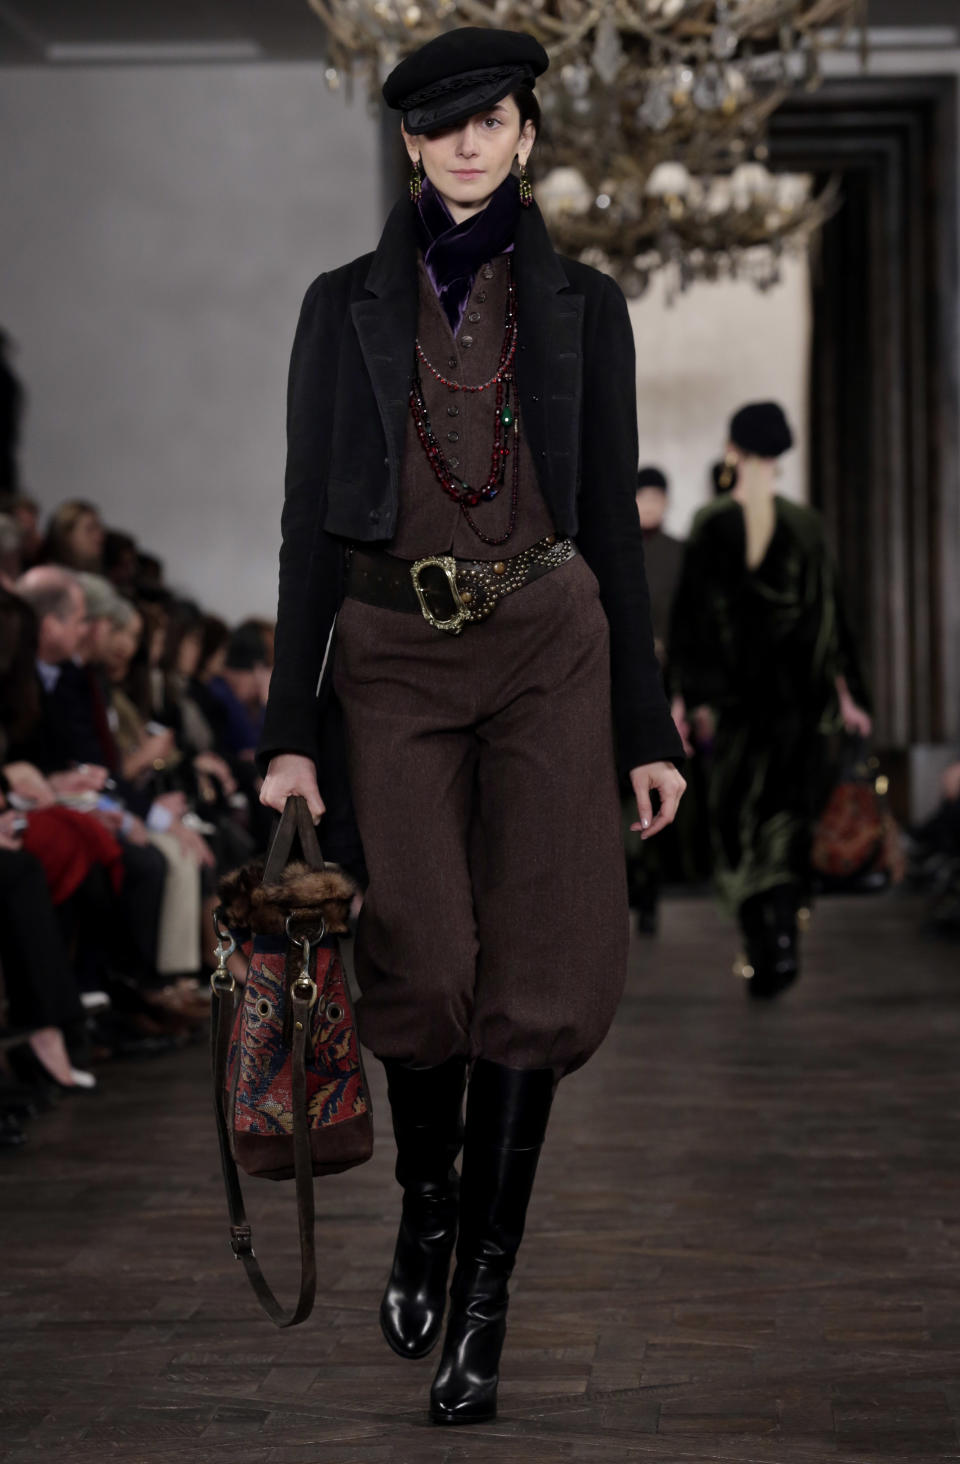 The Ralph Lauren Fall 2013 collection is modeled during Fashion Week in New York, Thursday, Feb. 14, 2013. (AP Photo/Richard Drew)